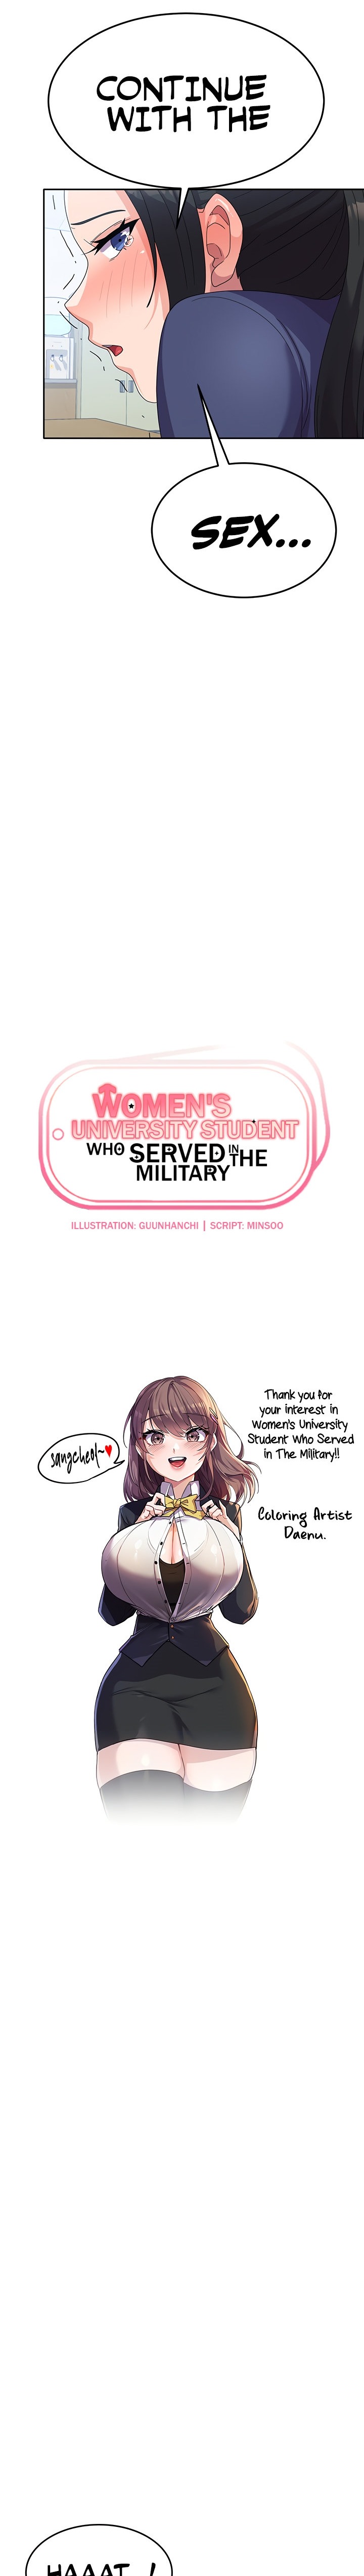 Women’s University Student who Served in the Military Chapter 21 - Page 2